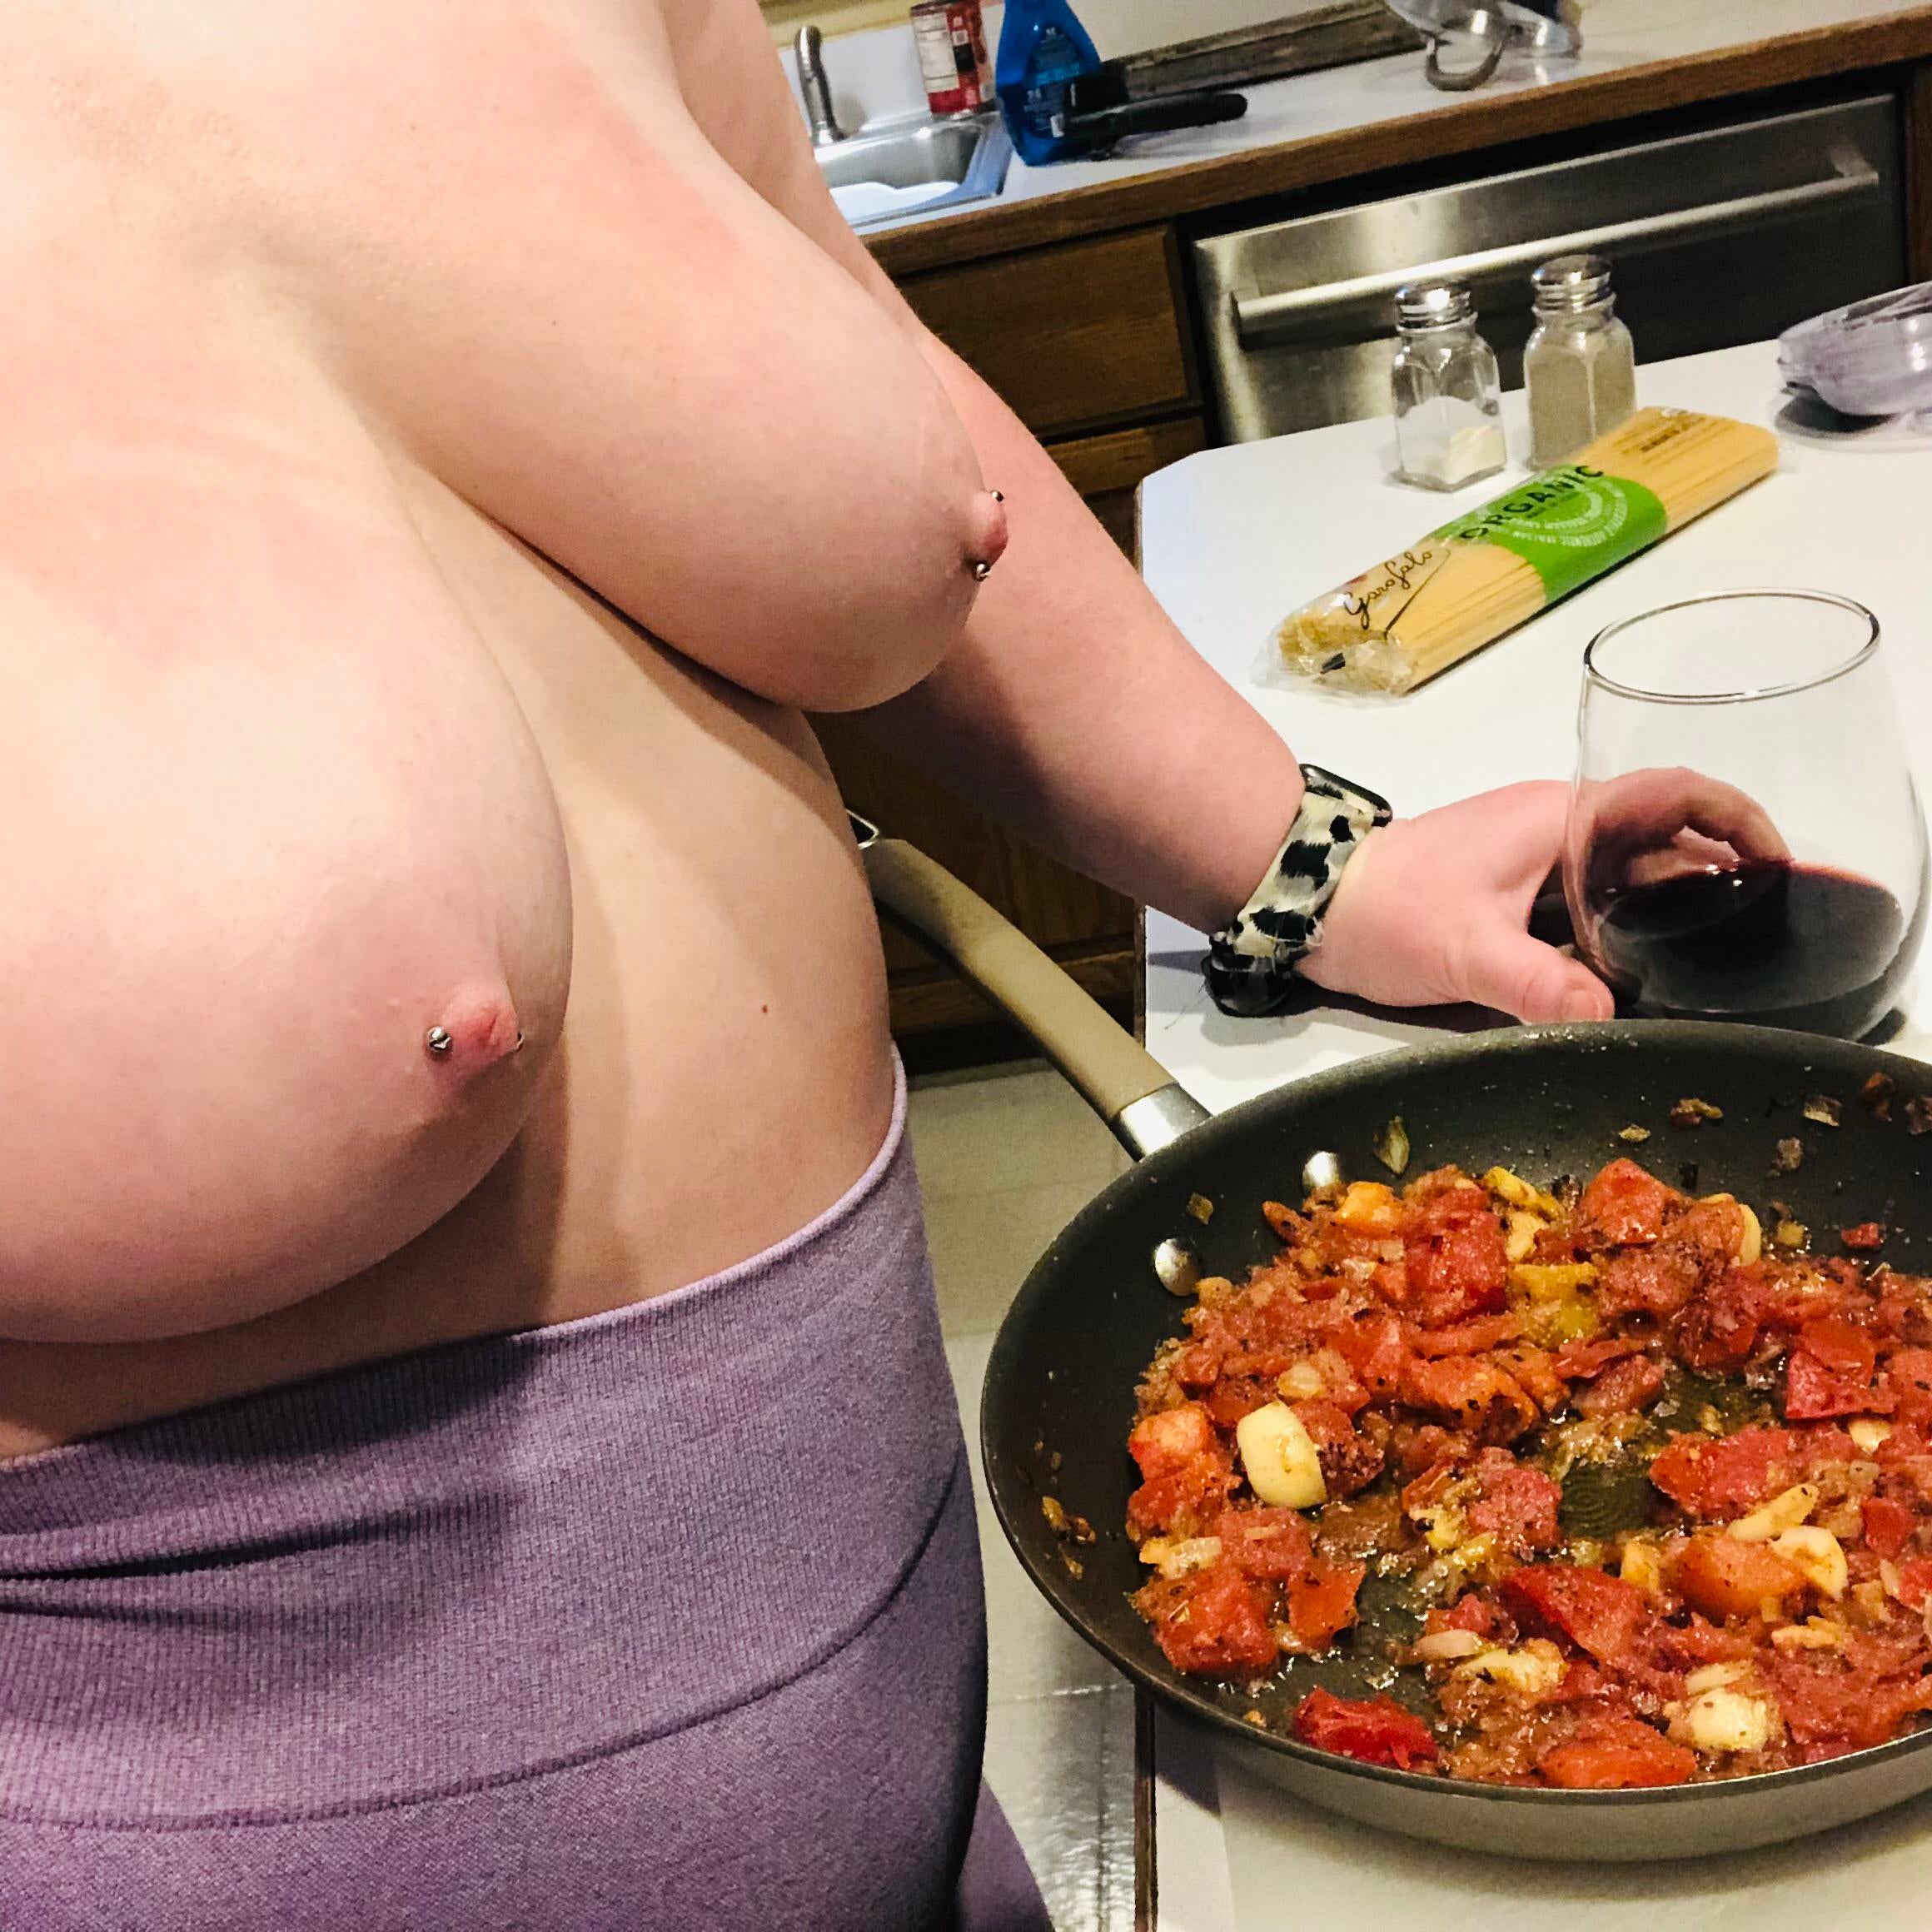 Bbwpictures -  What are you hungry [f]or?